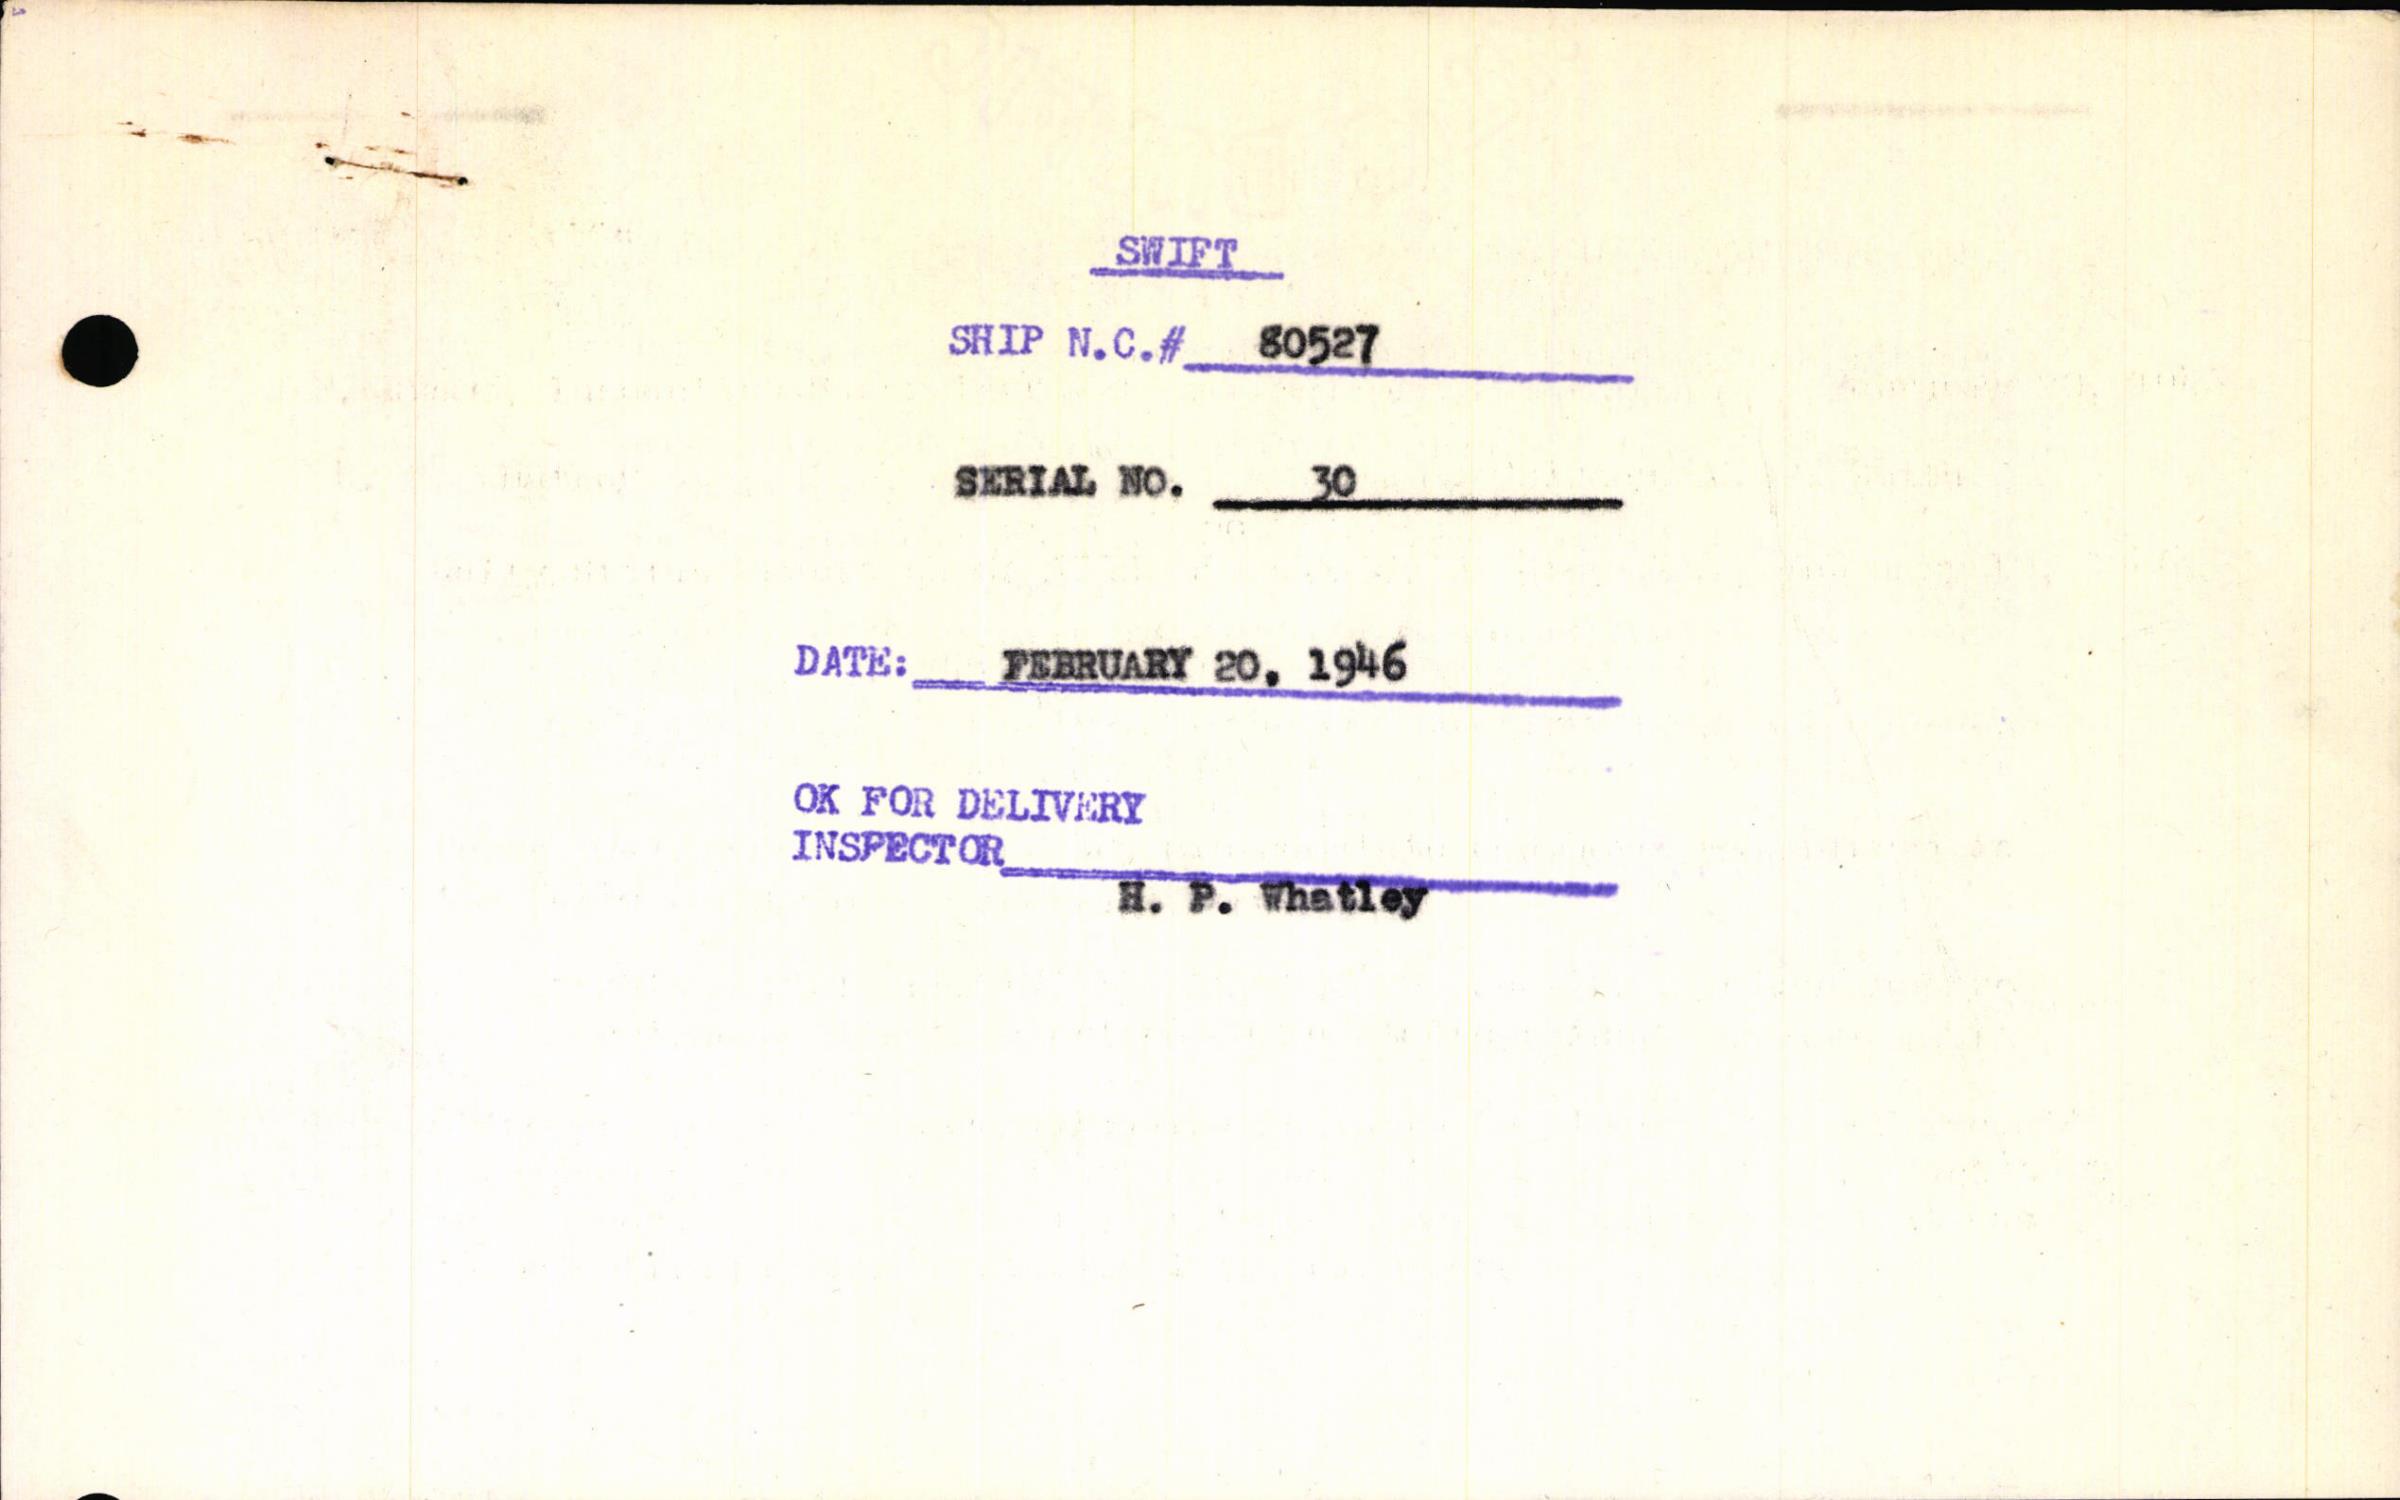 Sample page 3 from AirCorps Library document: Technical Information for Serial Number 30